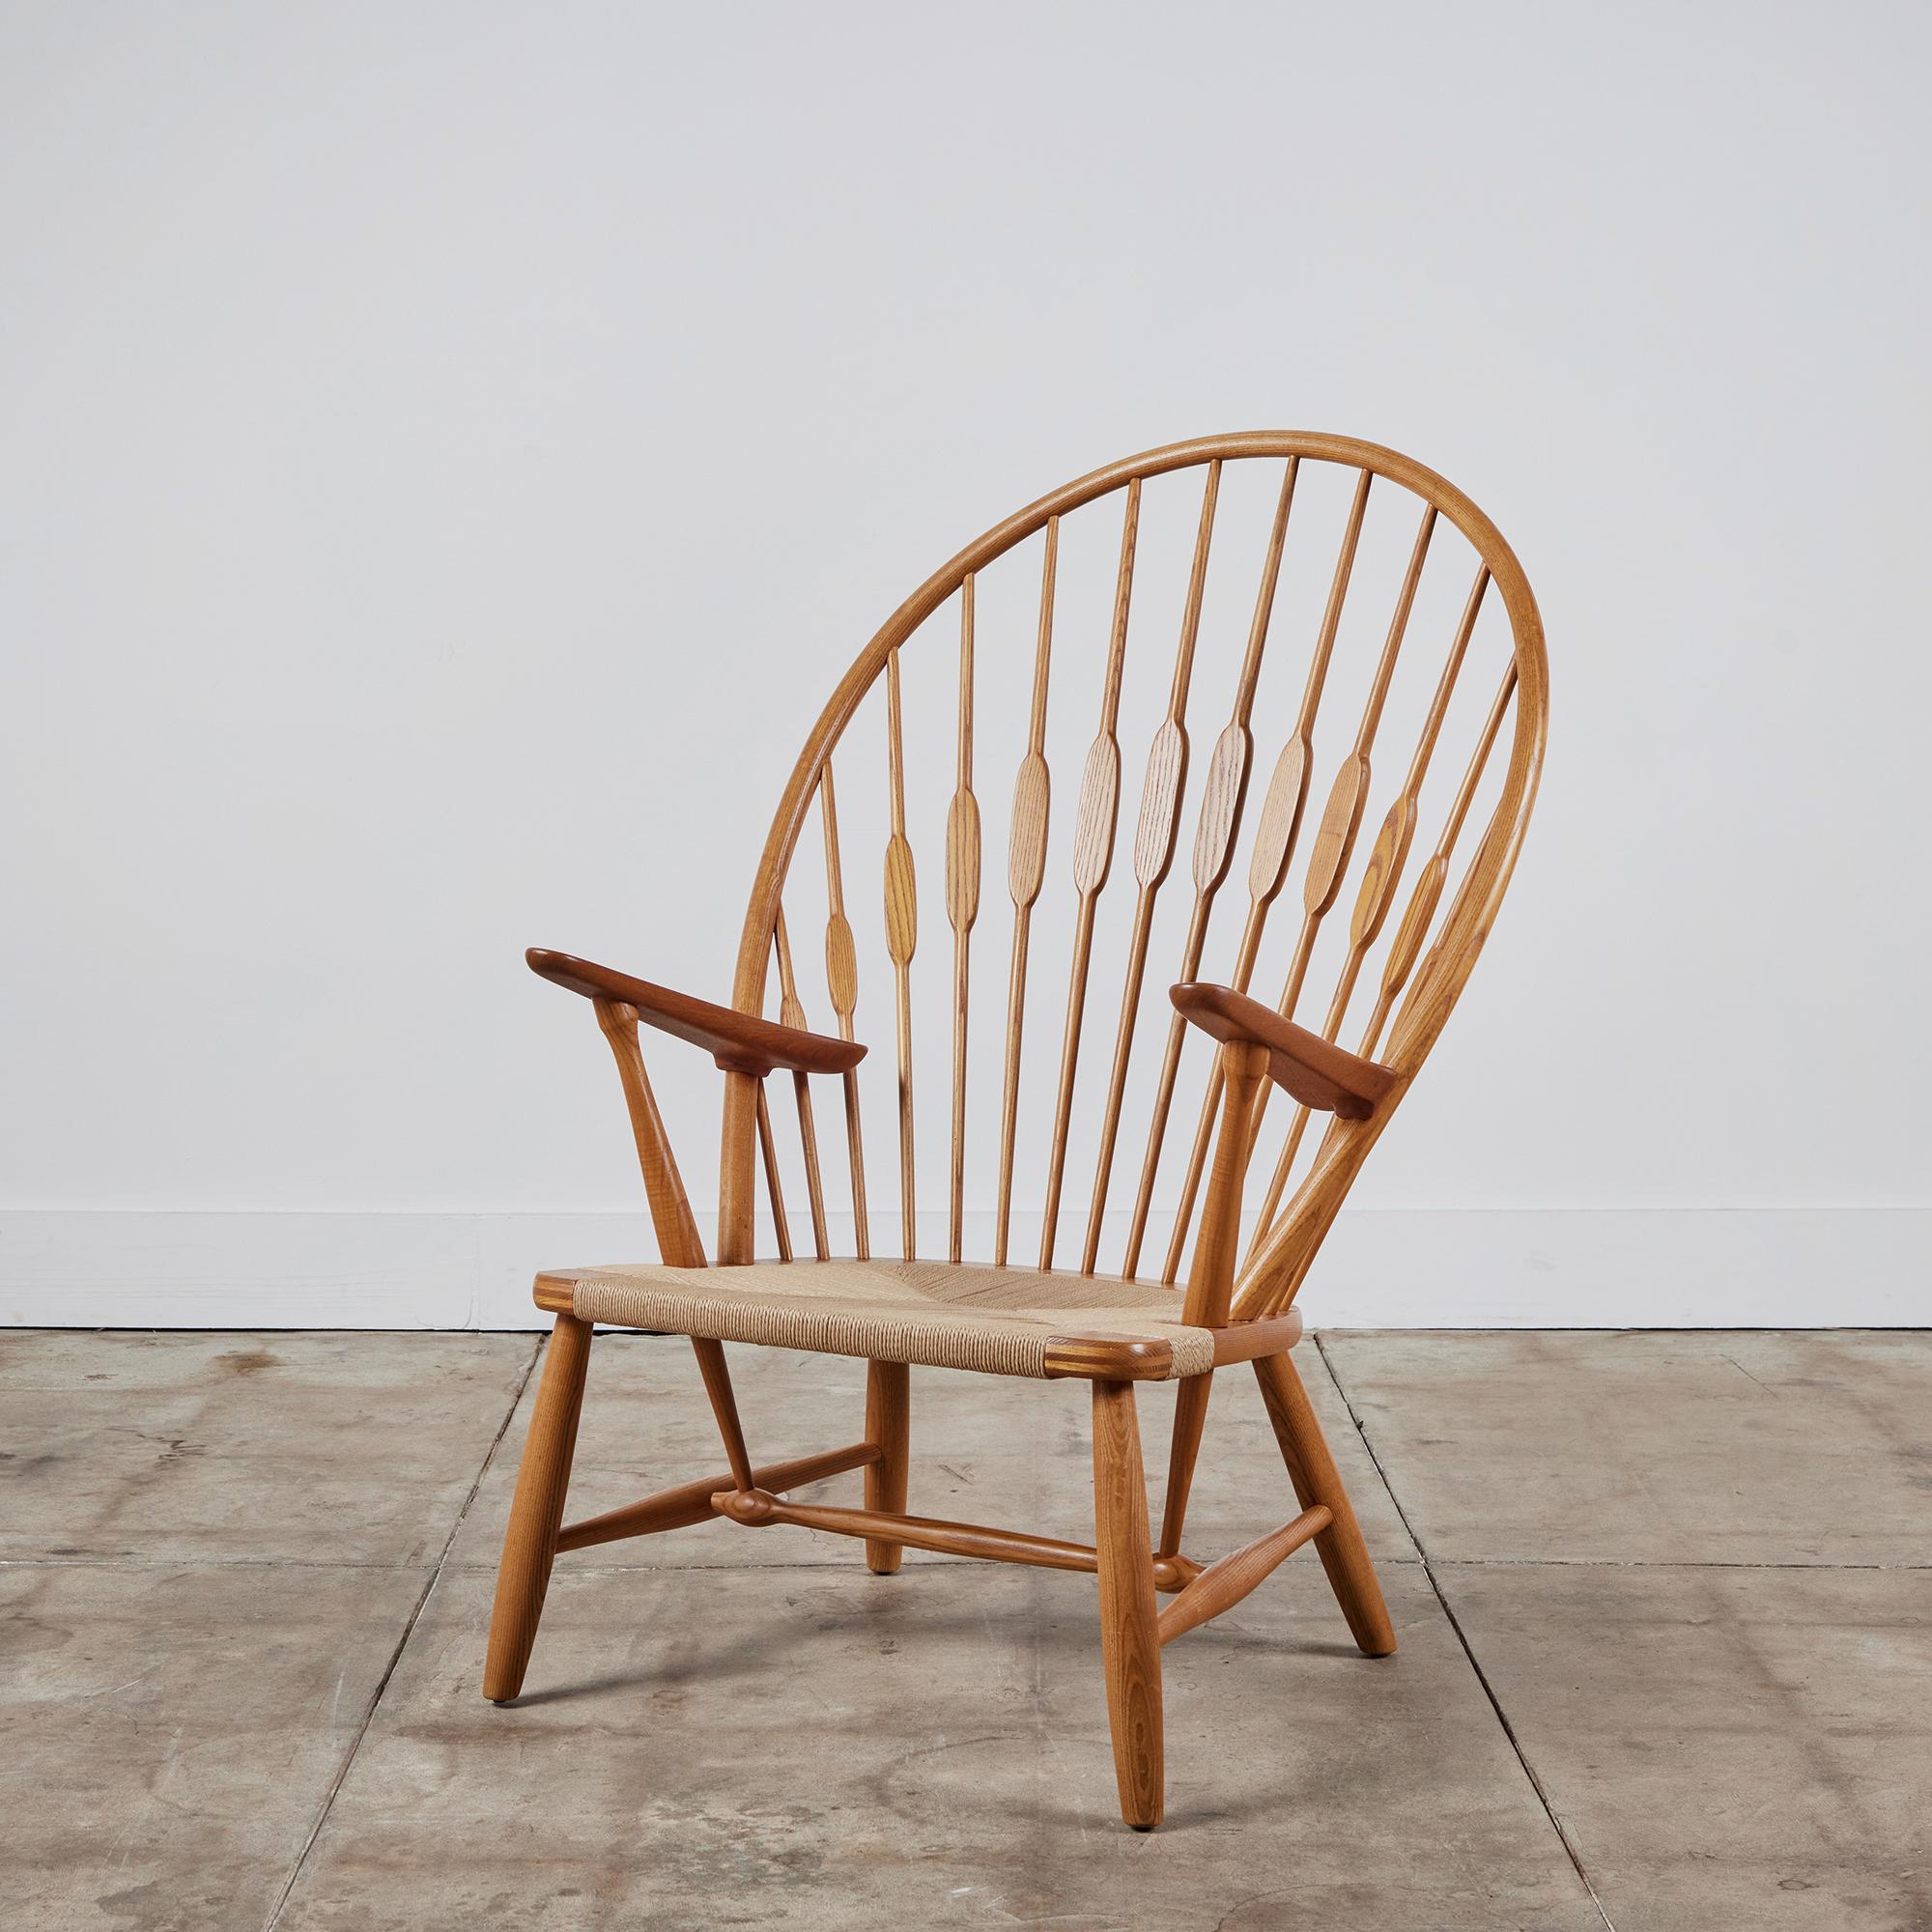 Designed in 1947, this fully restored Hans Wegner peacock chair features Windsor chair styling and characteristic attention to detail. The solid oak and teak frame has a high, arched back strung with round wooden supports that flatten where the